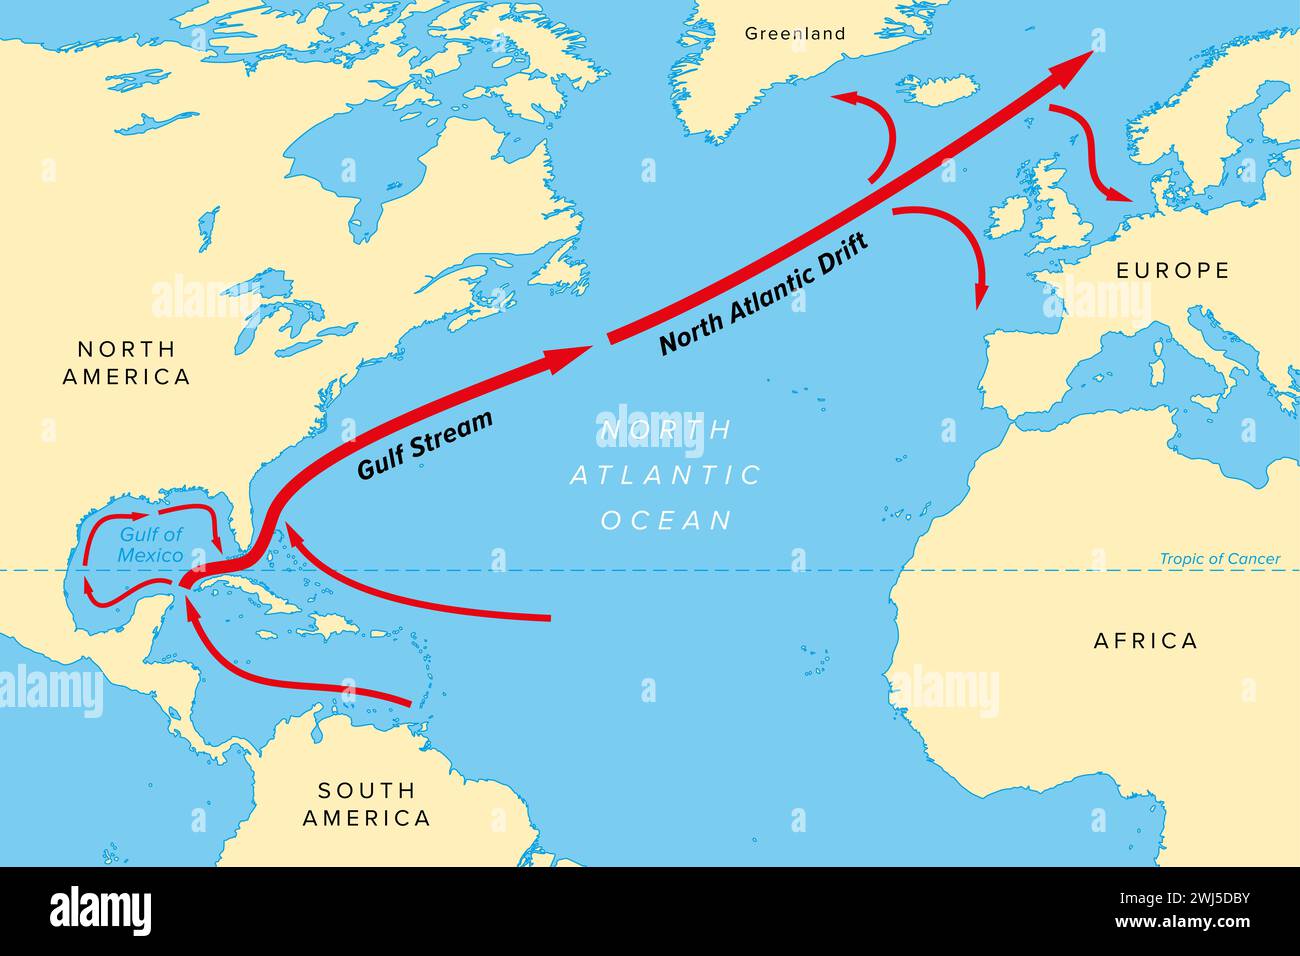 Map of the Gulf Stream with its northern extension North Atlantic Drift. Warm and swift Atlantic Ocean current, originates in Gulf of Mexico. Stock Photo